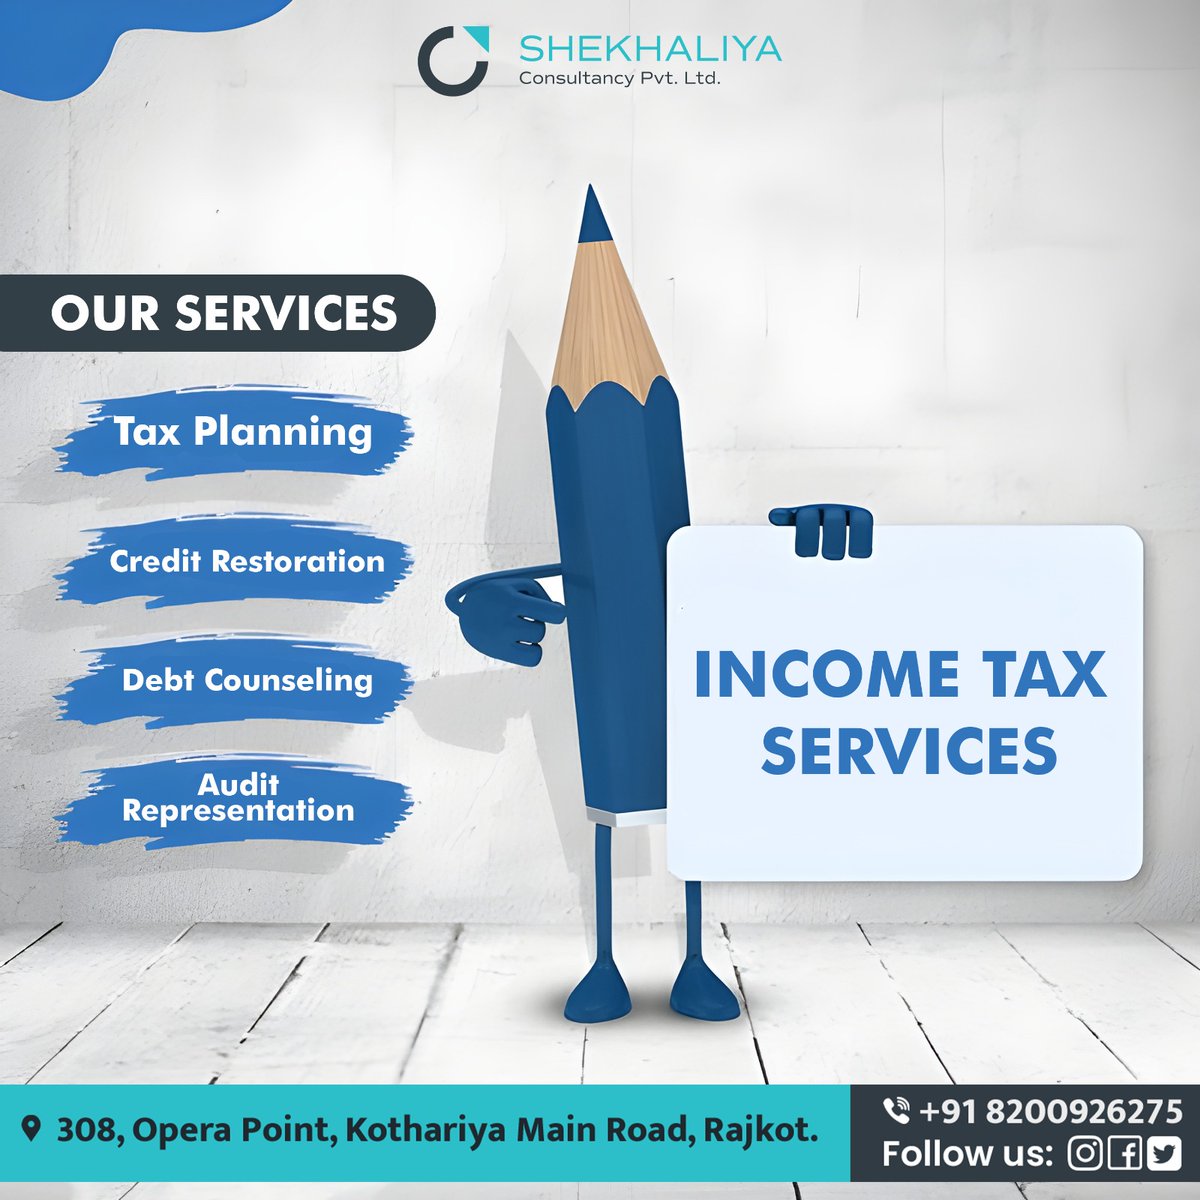 👉 Income Tax Services:- 
✔ Our Services:- 
             🔶 Tax Planning 
             🔶 Credit Restoration 
             🔶 Debt Counselling 
.
.
.
#shekhaliyaconsultancy #consultancyservices #consultancyagency #loanservices #accounting  #ServicesOffered  #taxconsulting